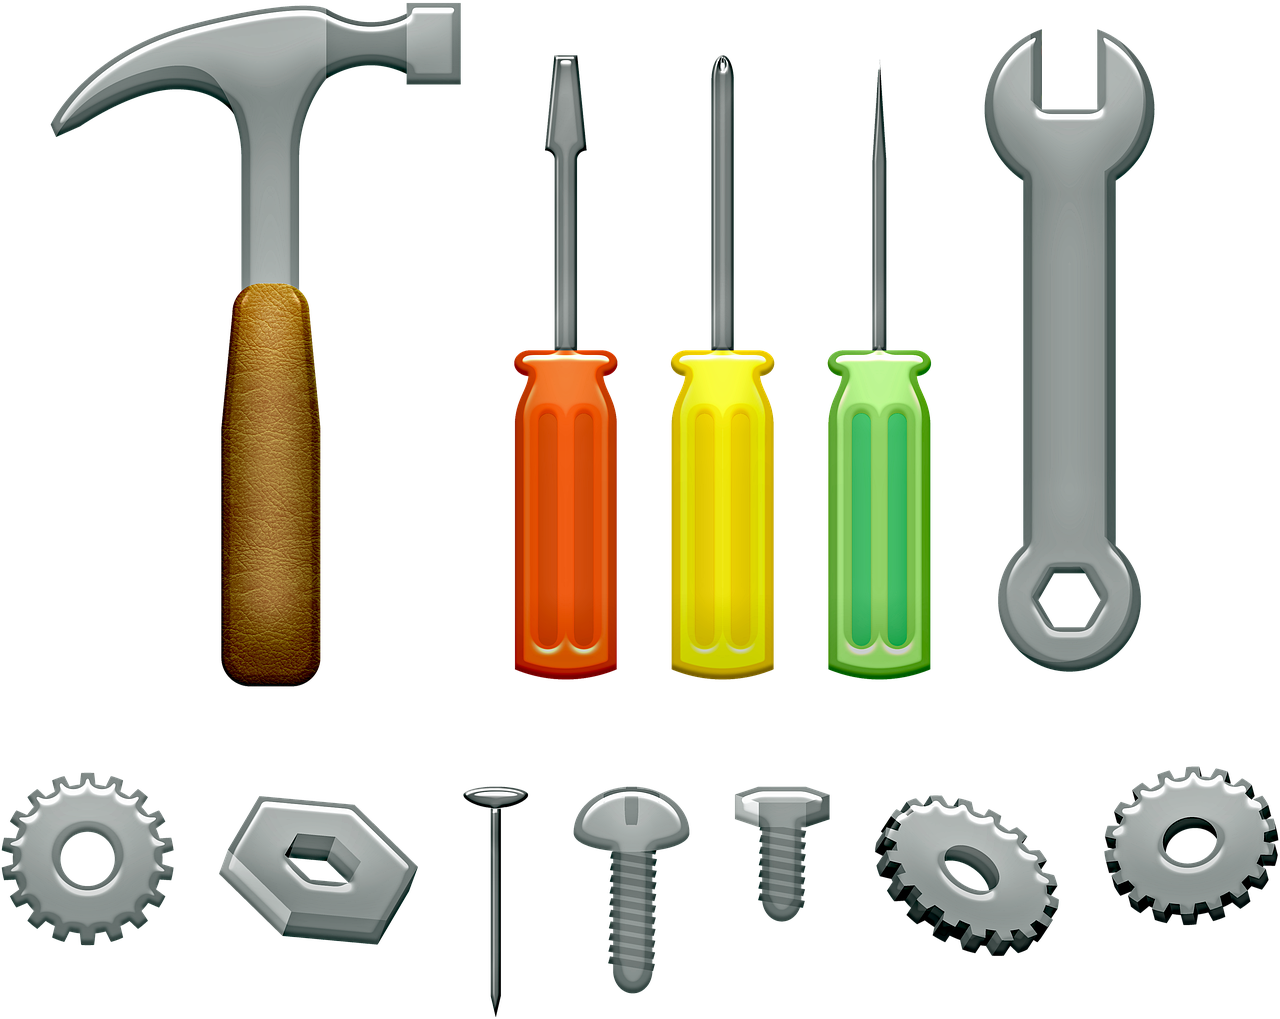 Tools Hammer Wrench Screwdriver  - 7089643 / Pixabay